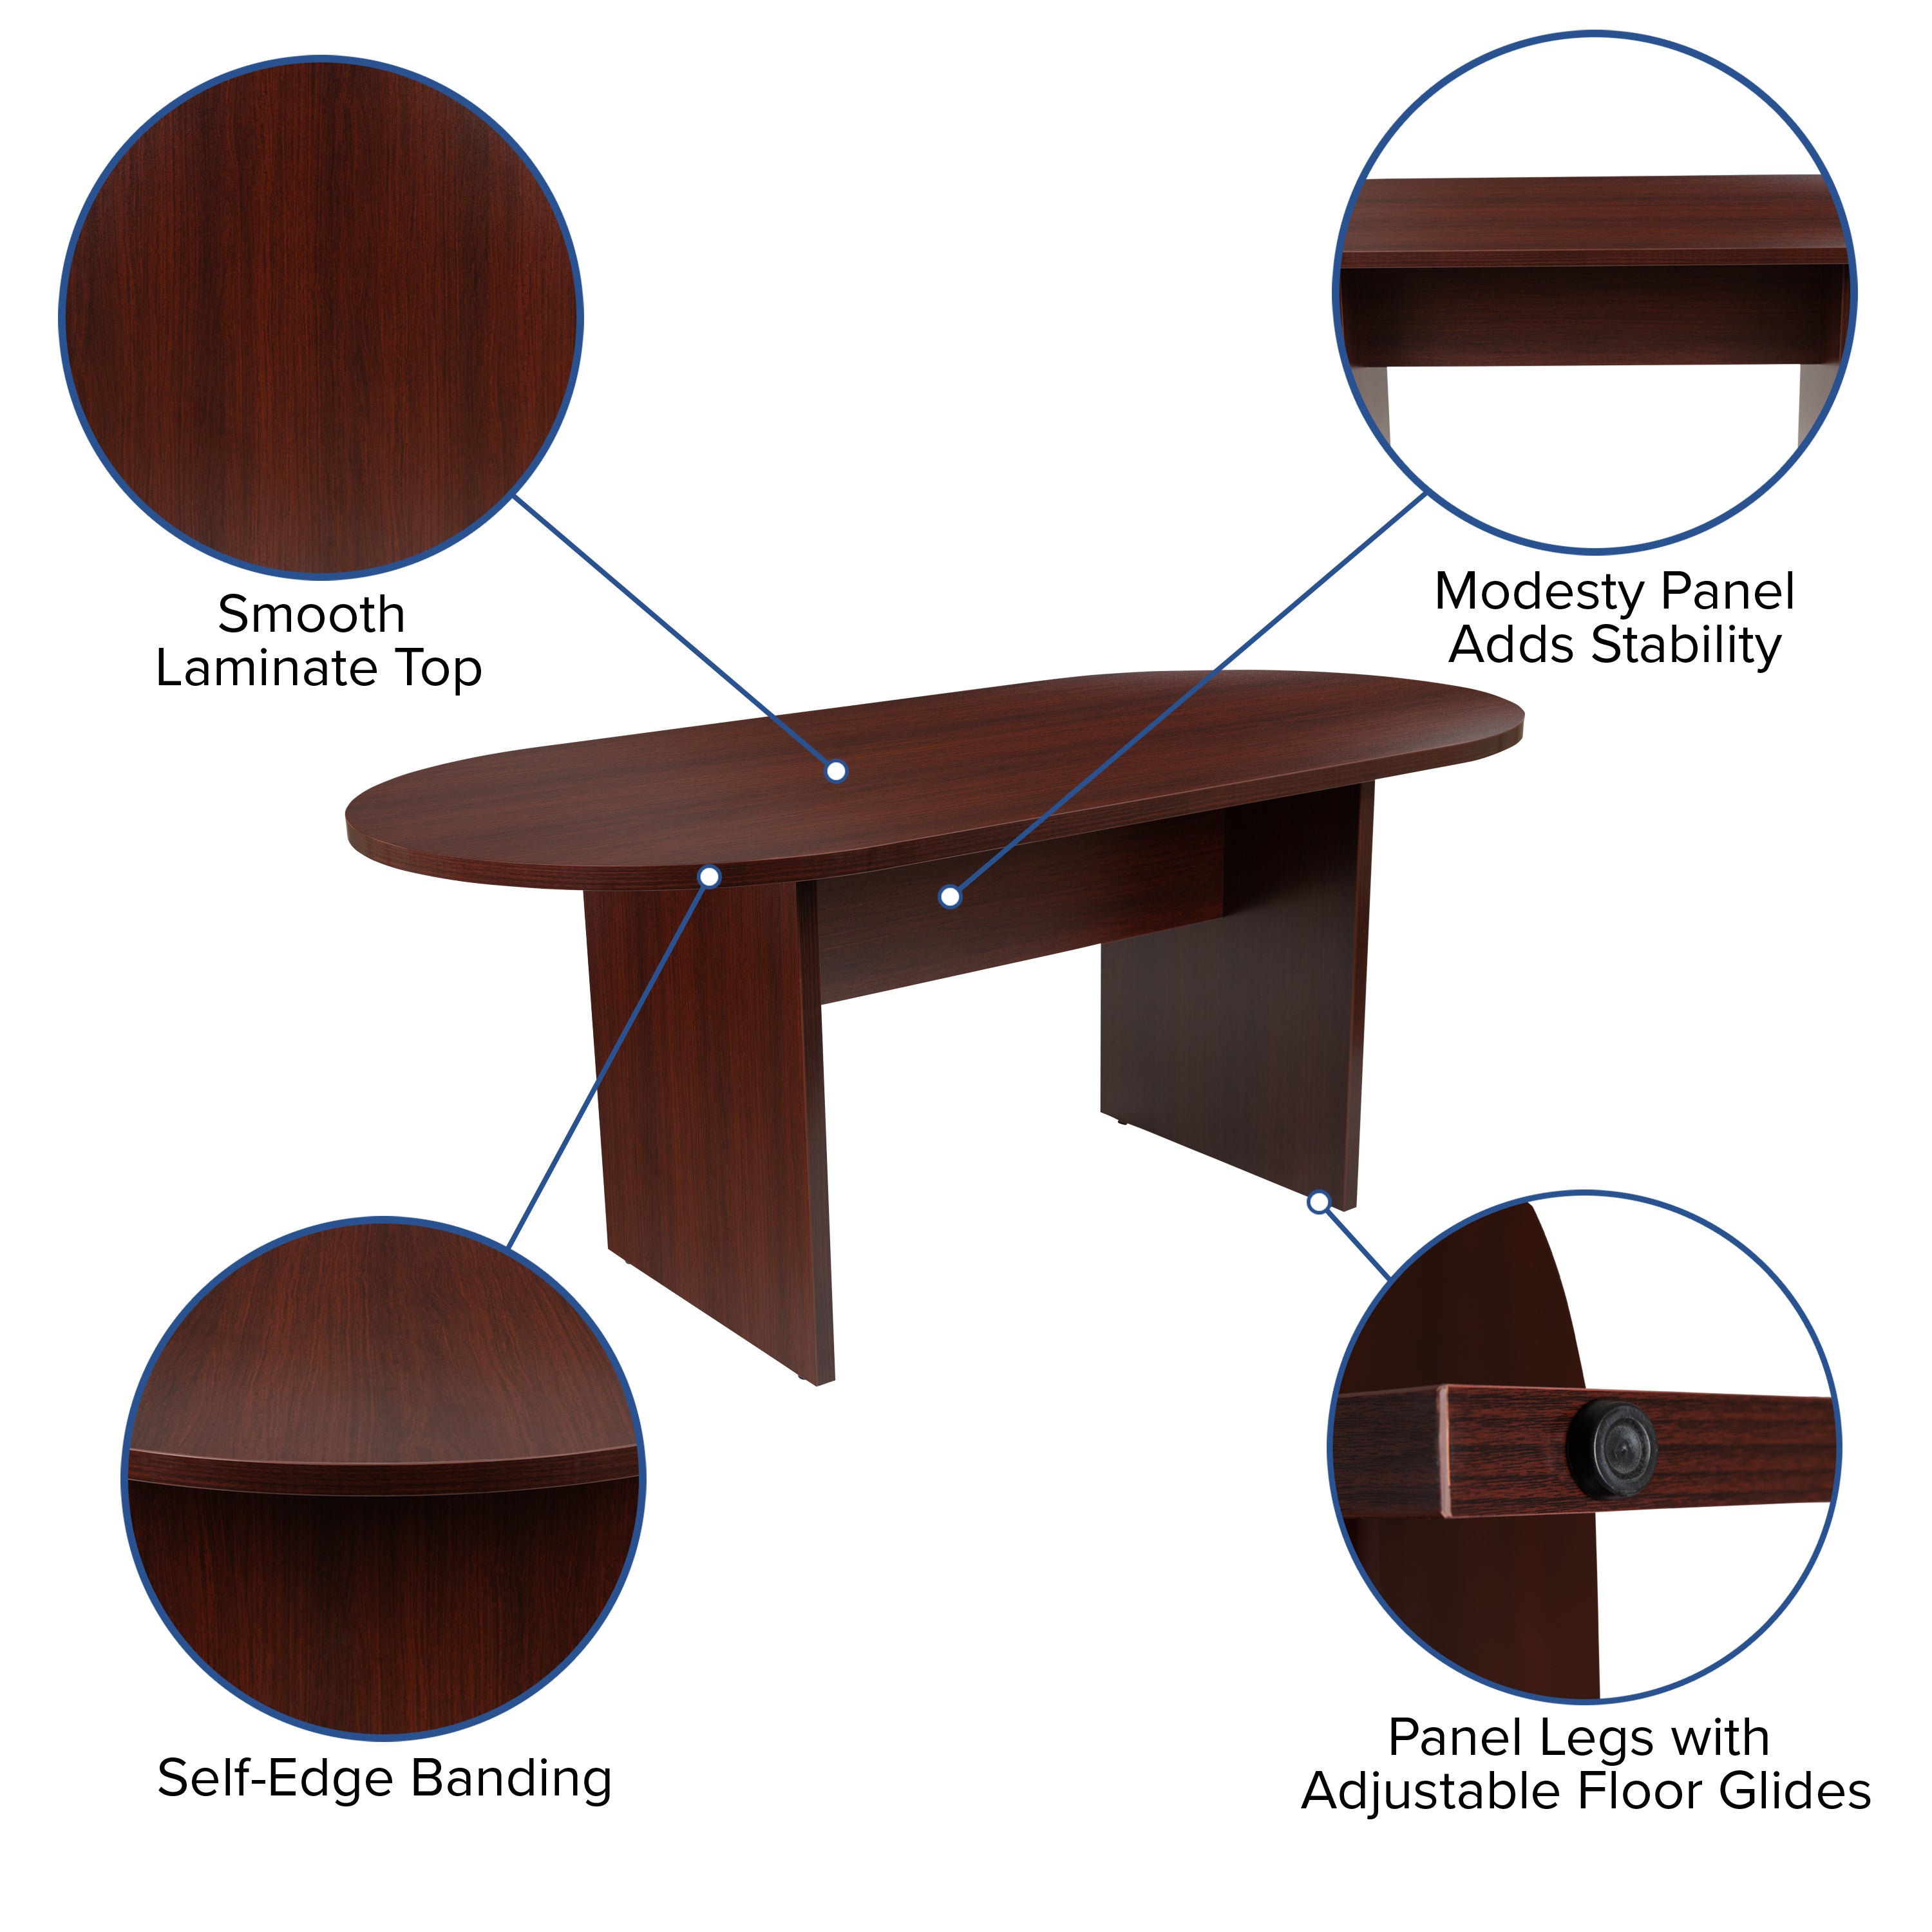 5 Piece Oval Conference Table Set with 4 LeatherSoft Executive Chairs-Office Bundle - Conference Table, Chair-Flash Furniture-Wall2Wall Furnishings